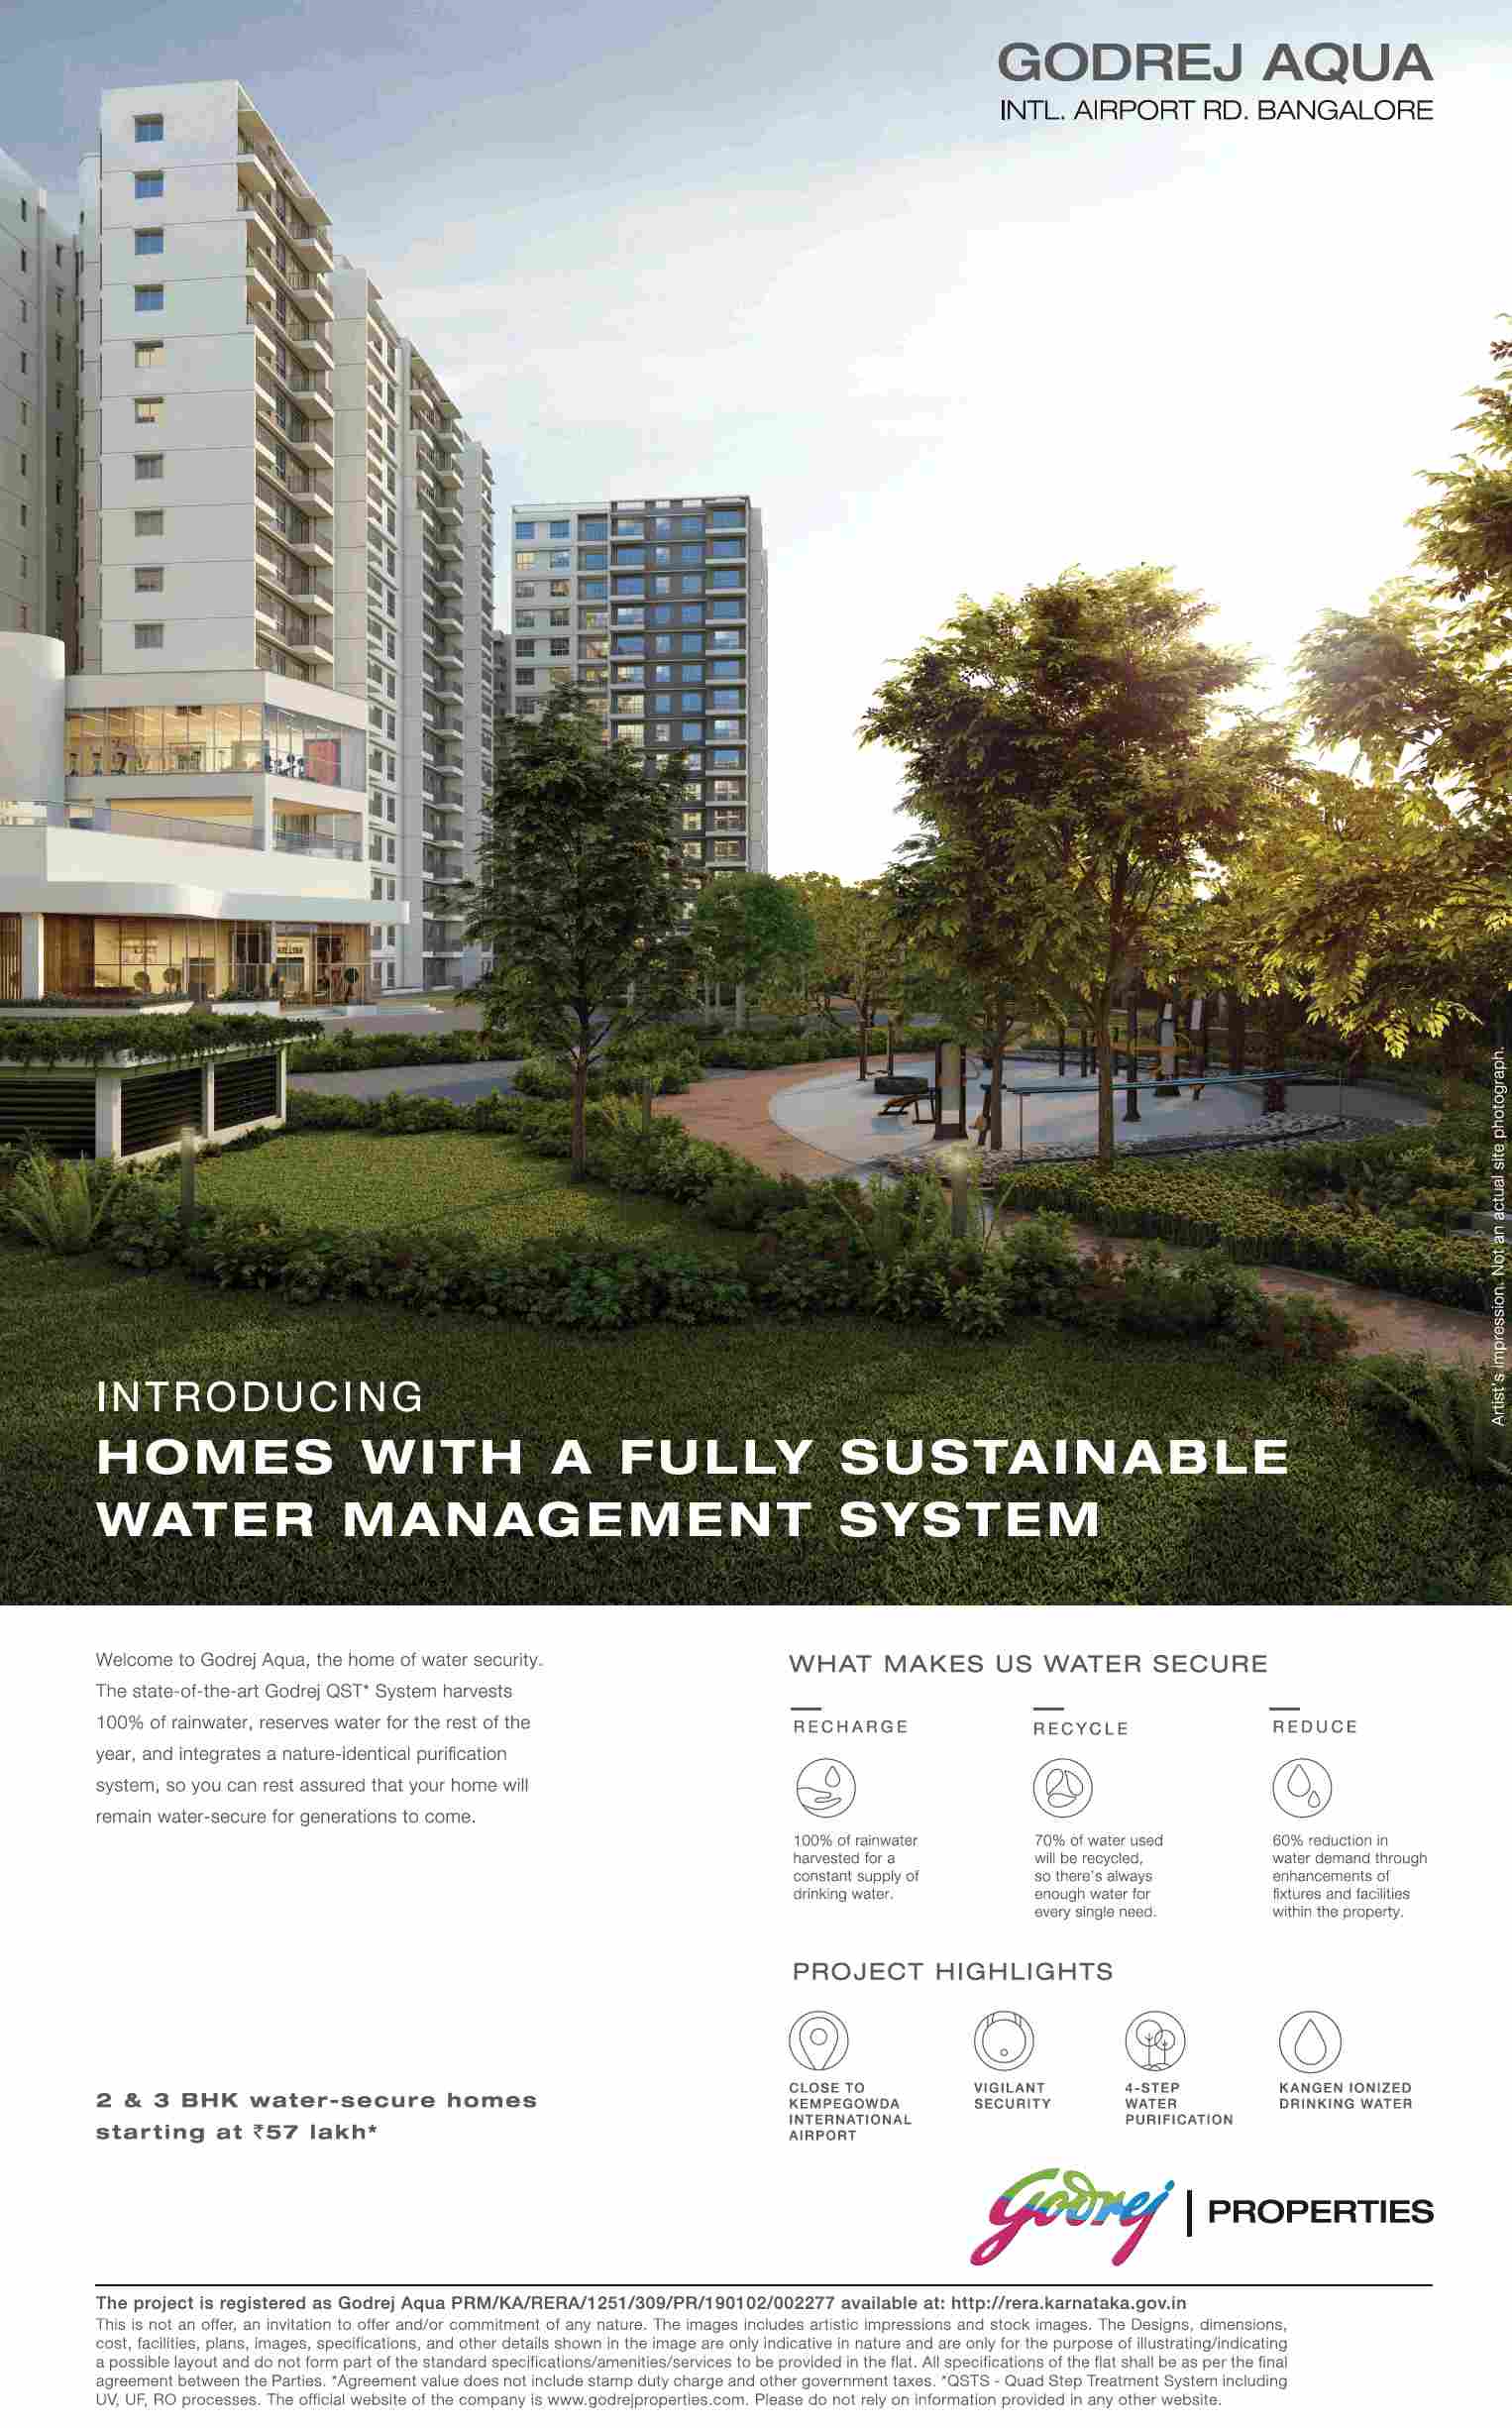 Introducing homes with fully sustainable water management system at Godrej Aqua in Bangalore